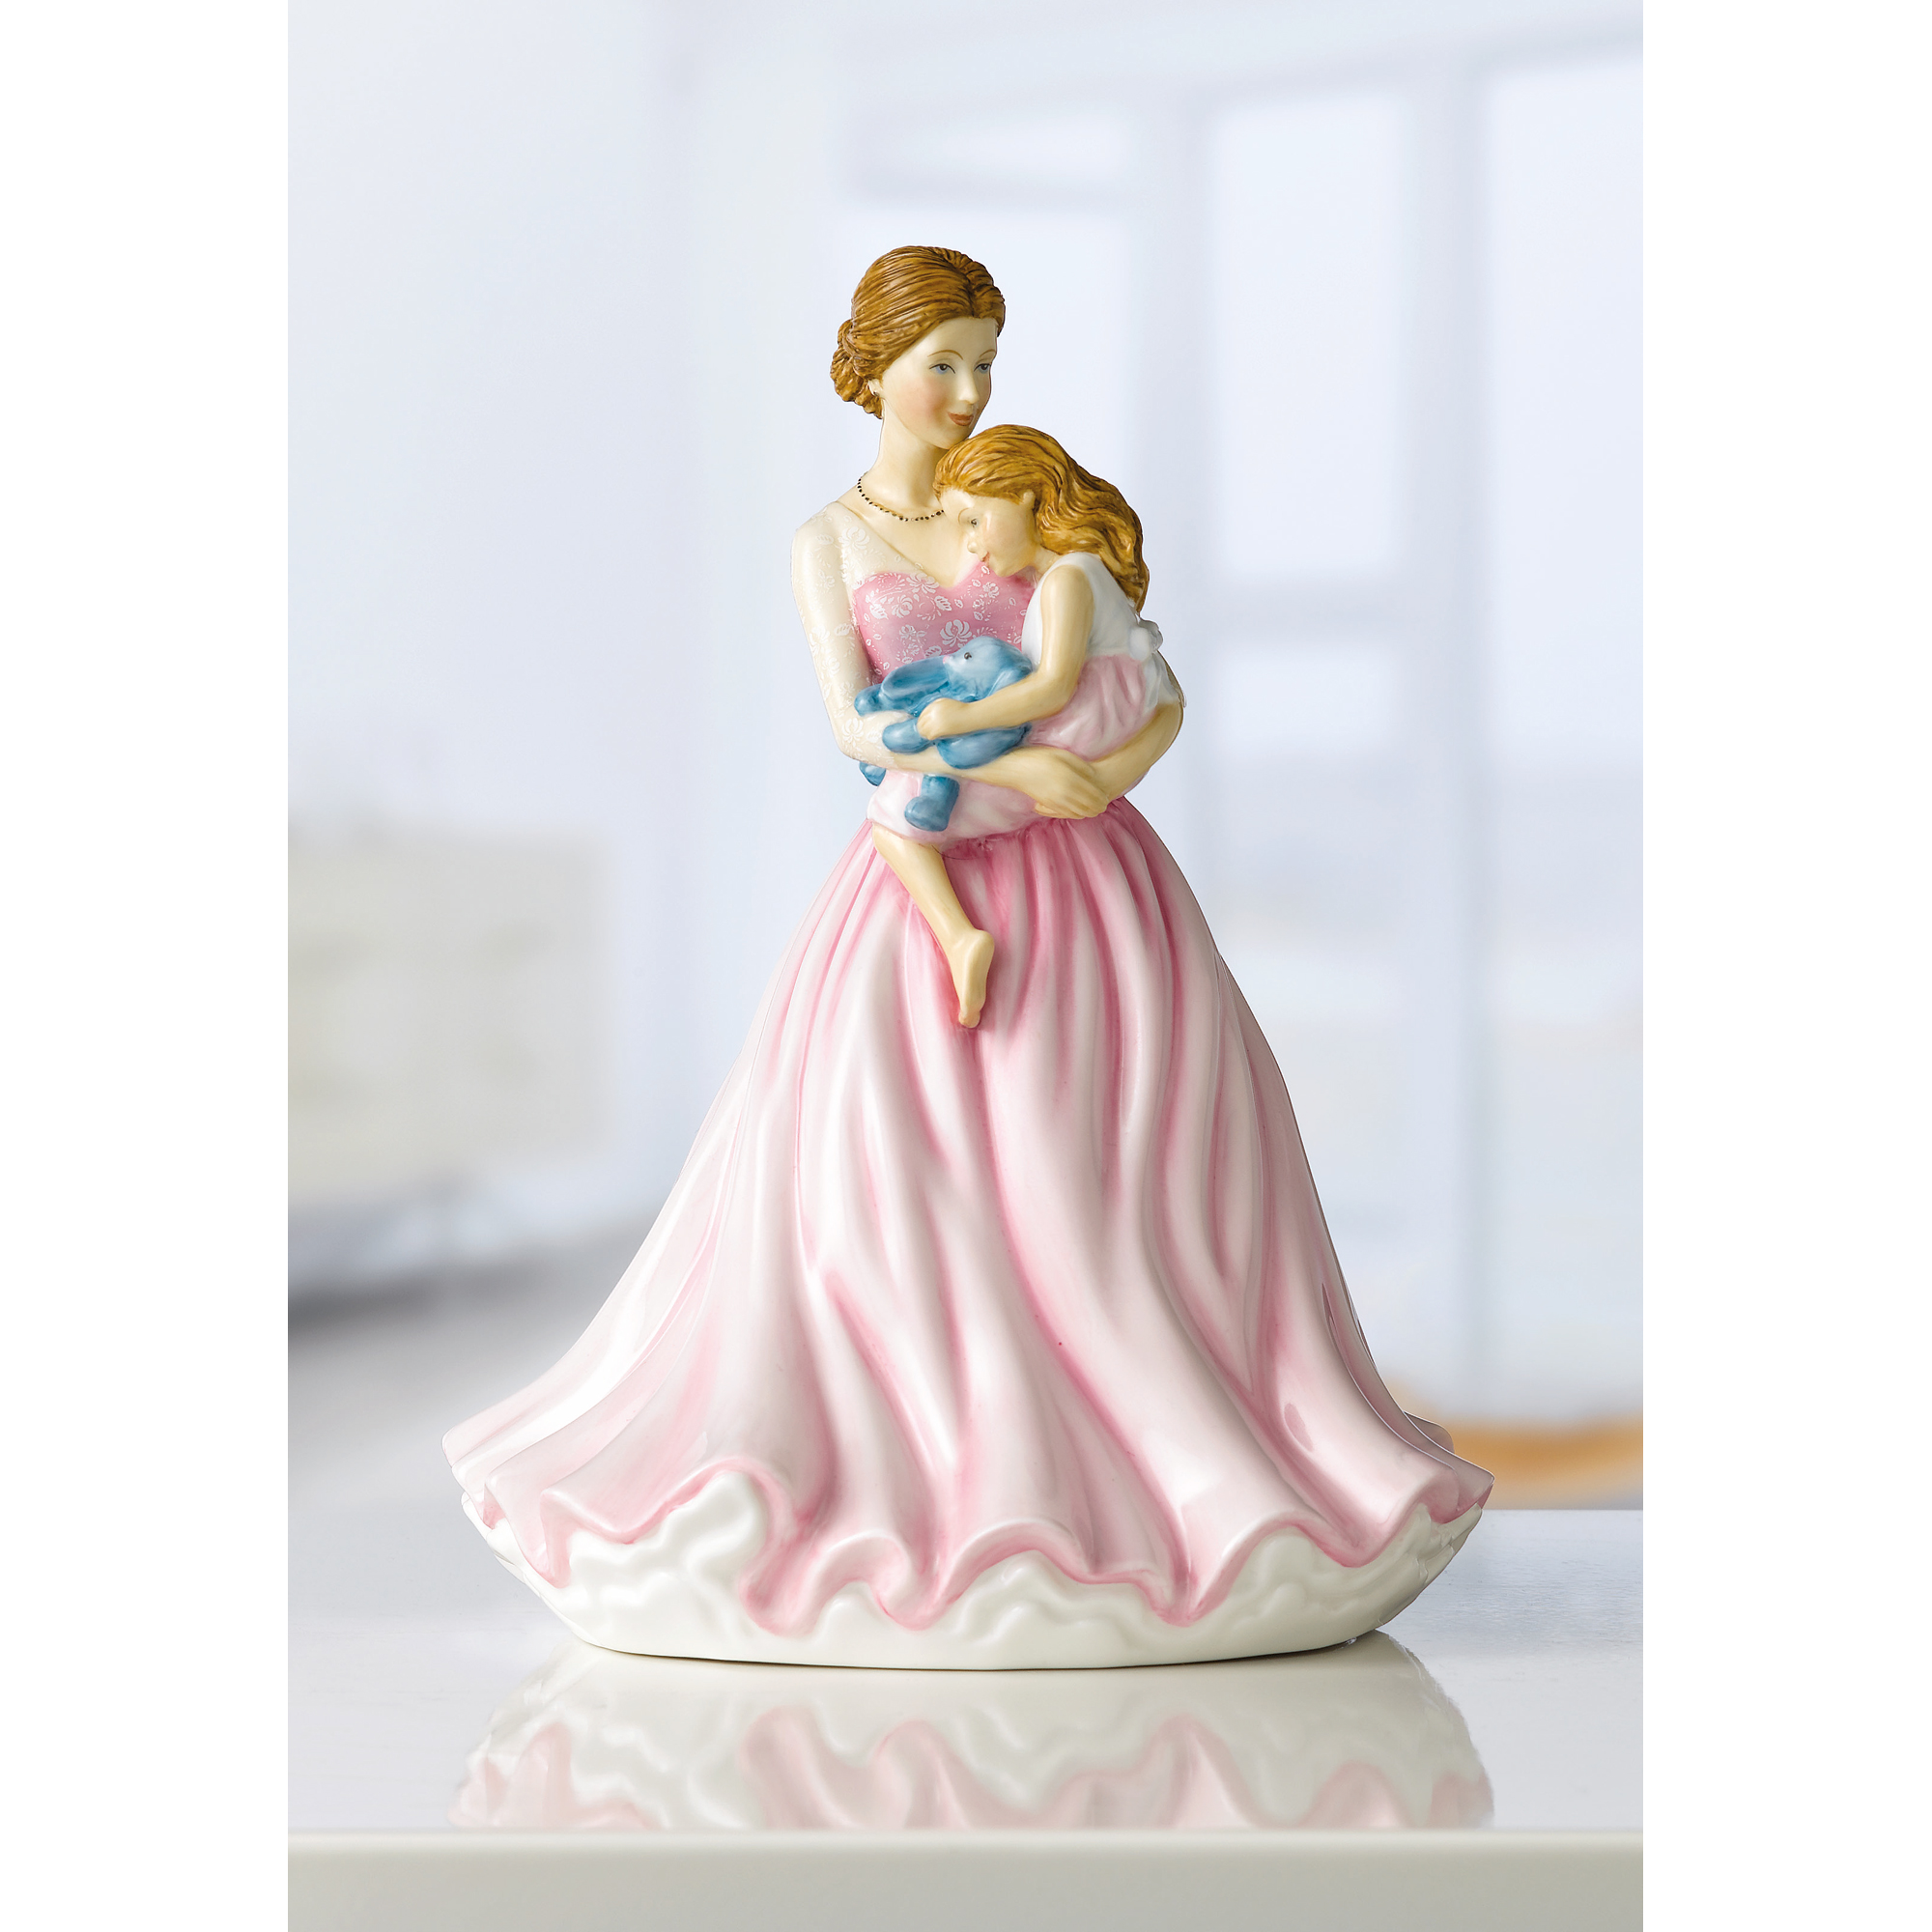 Mother's Angel HN5909 2019 Mother's Day Figure of the Year Royal Doulton Figurine